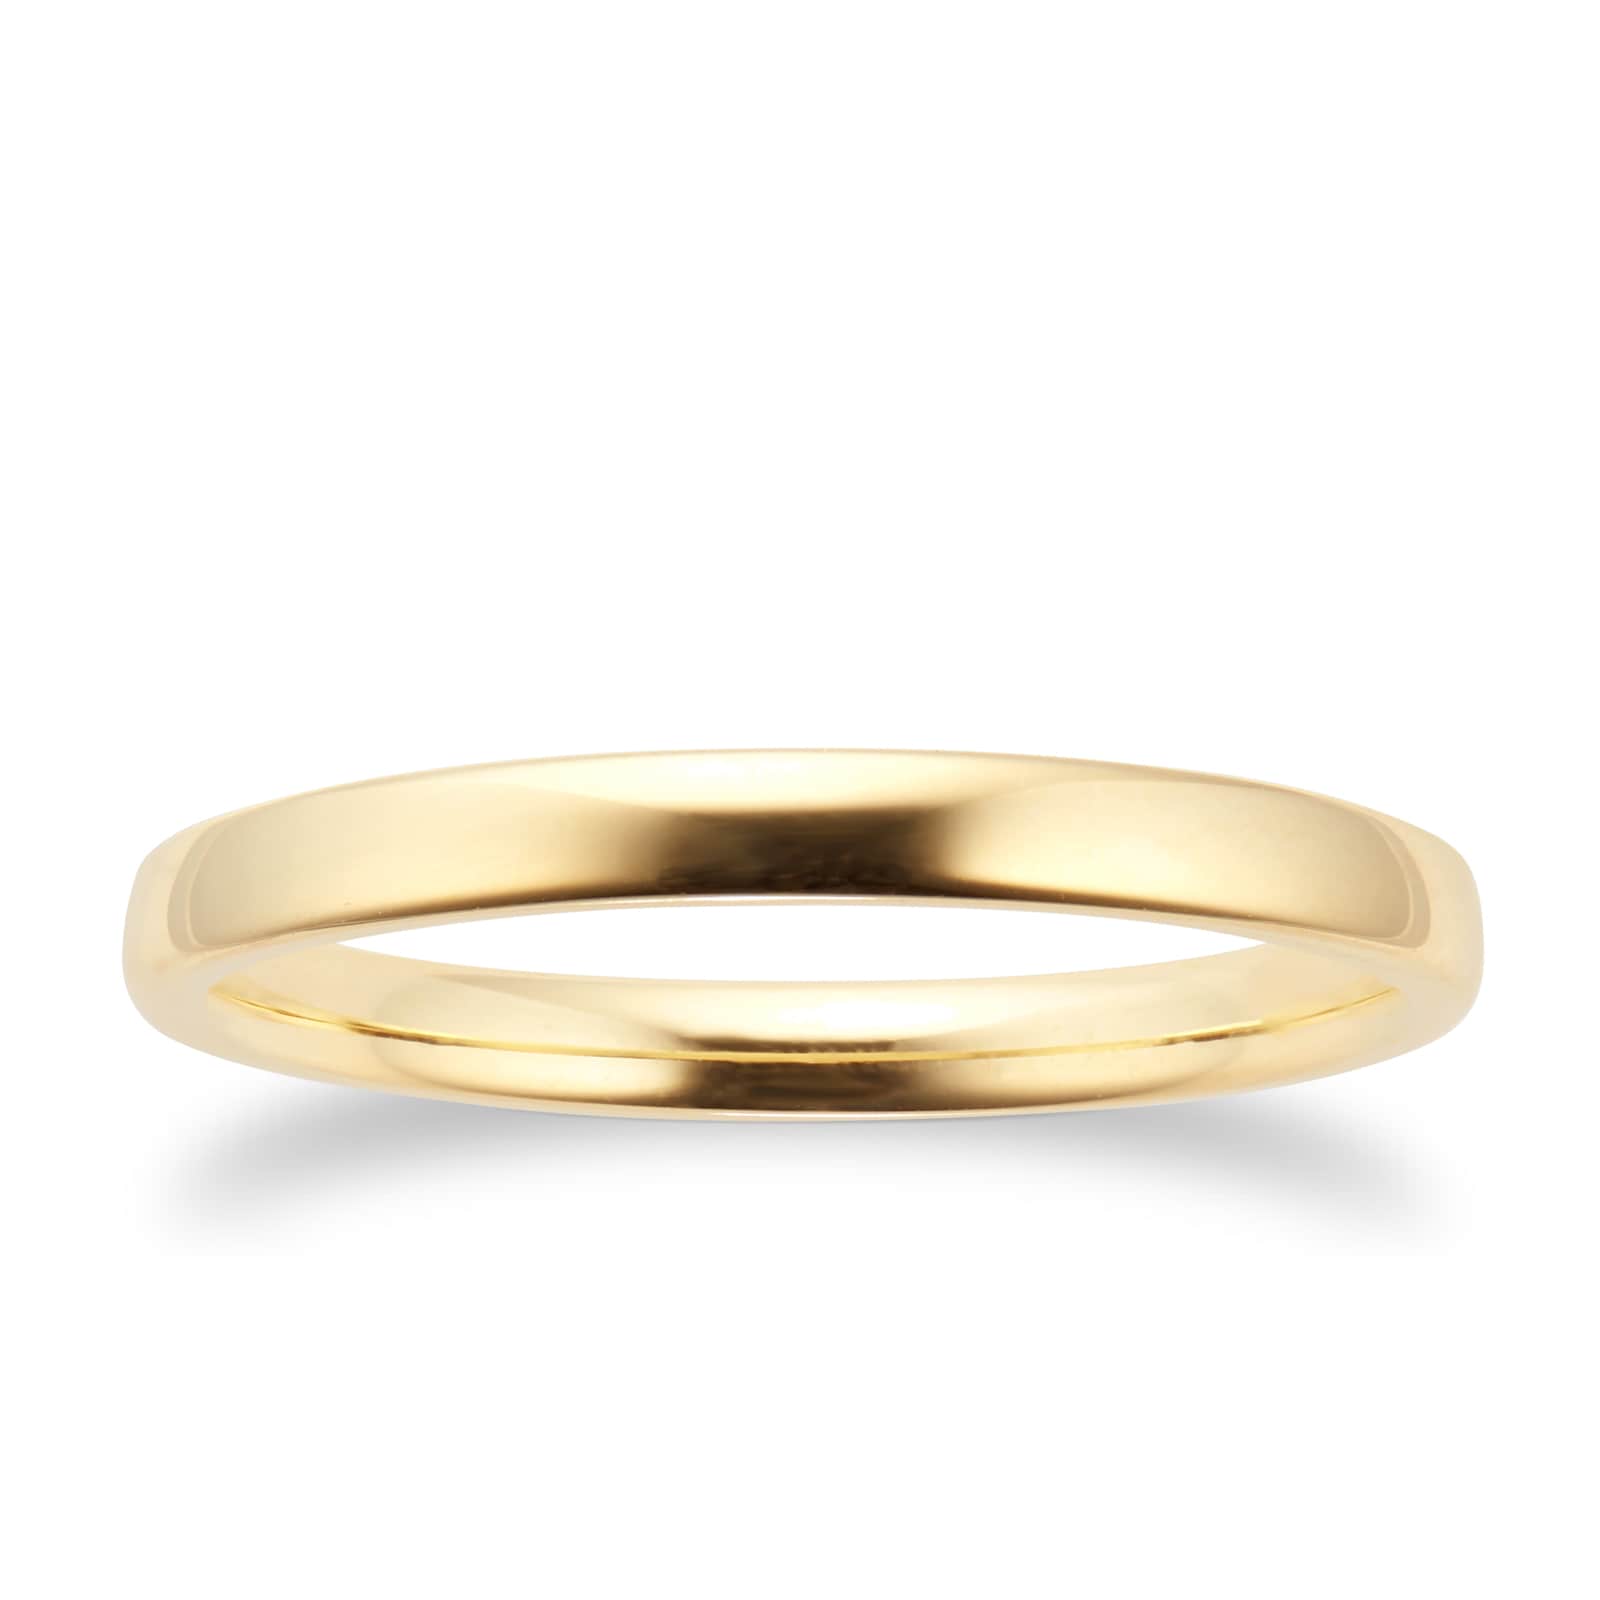 2mm Slight Court Standard Wedding Ring In 18 Carat Yellow Gold Ring Size L5